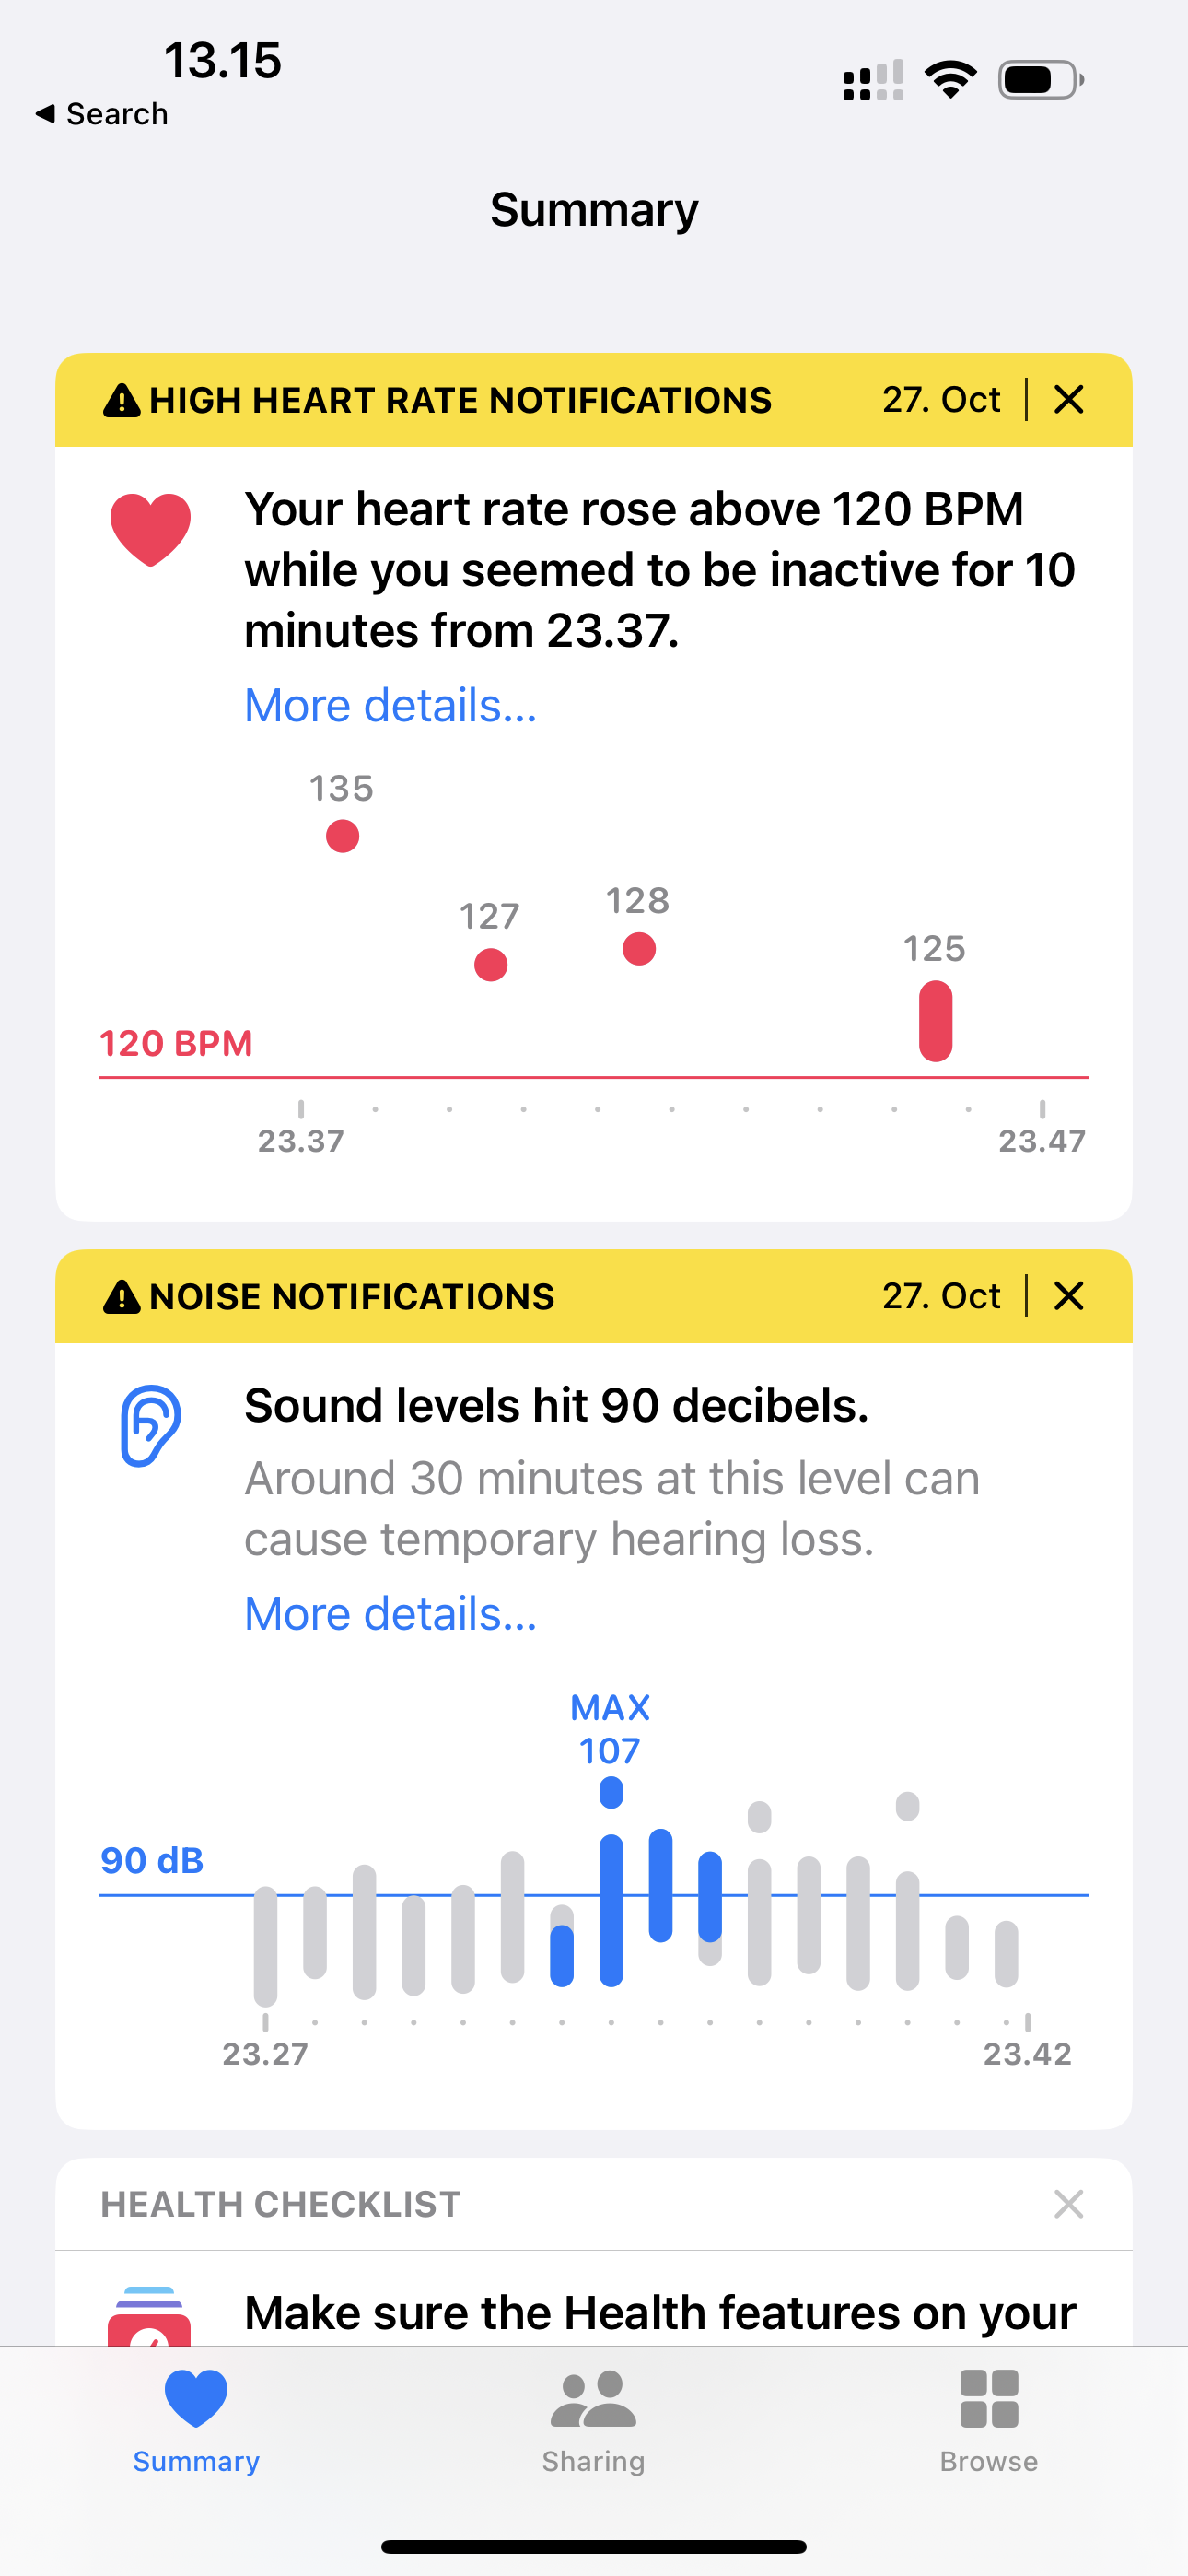 Apple health warning about raised heart rate and high level of ambient noise